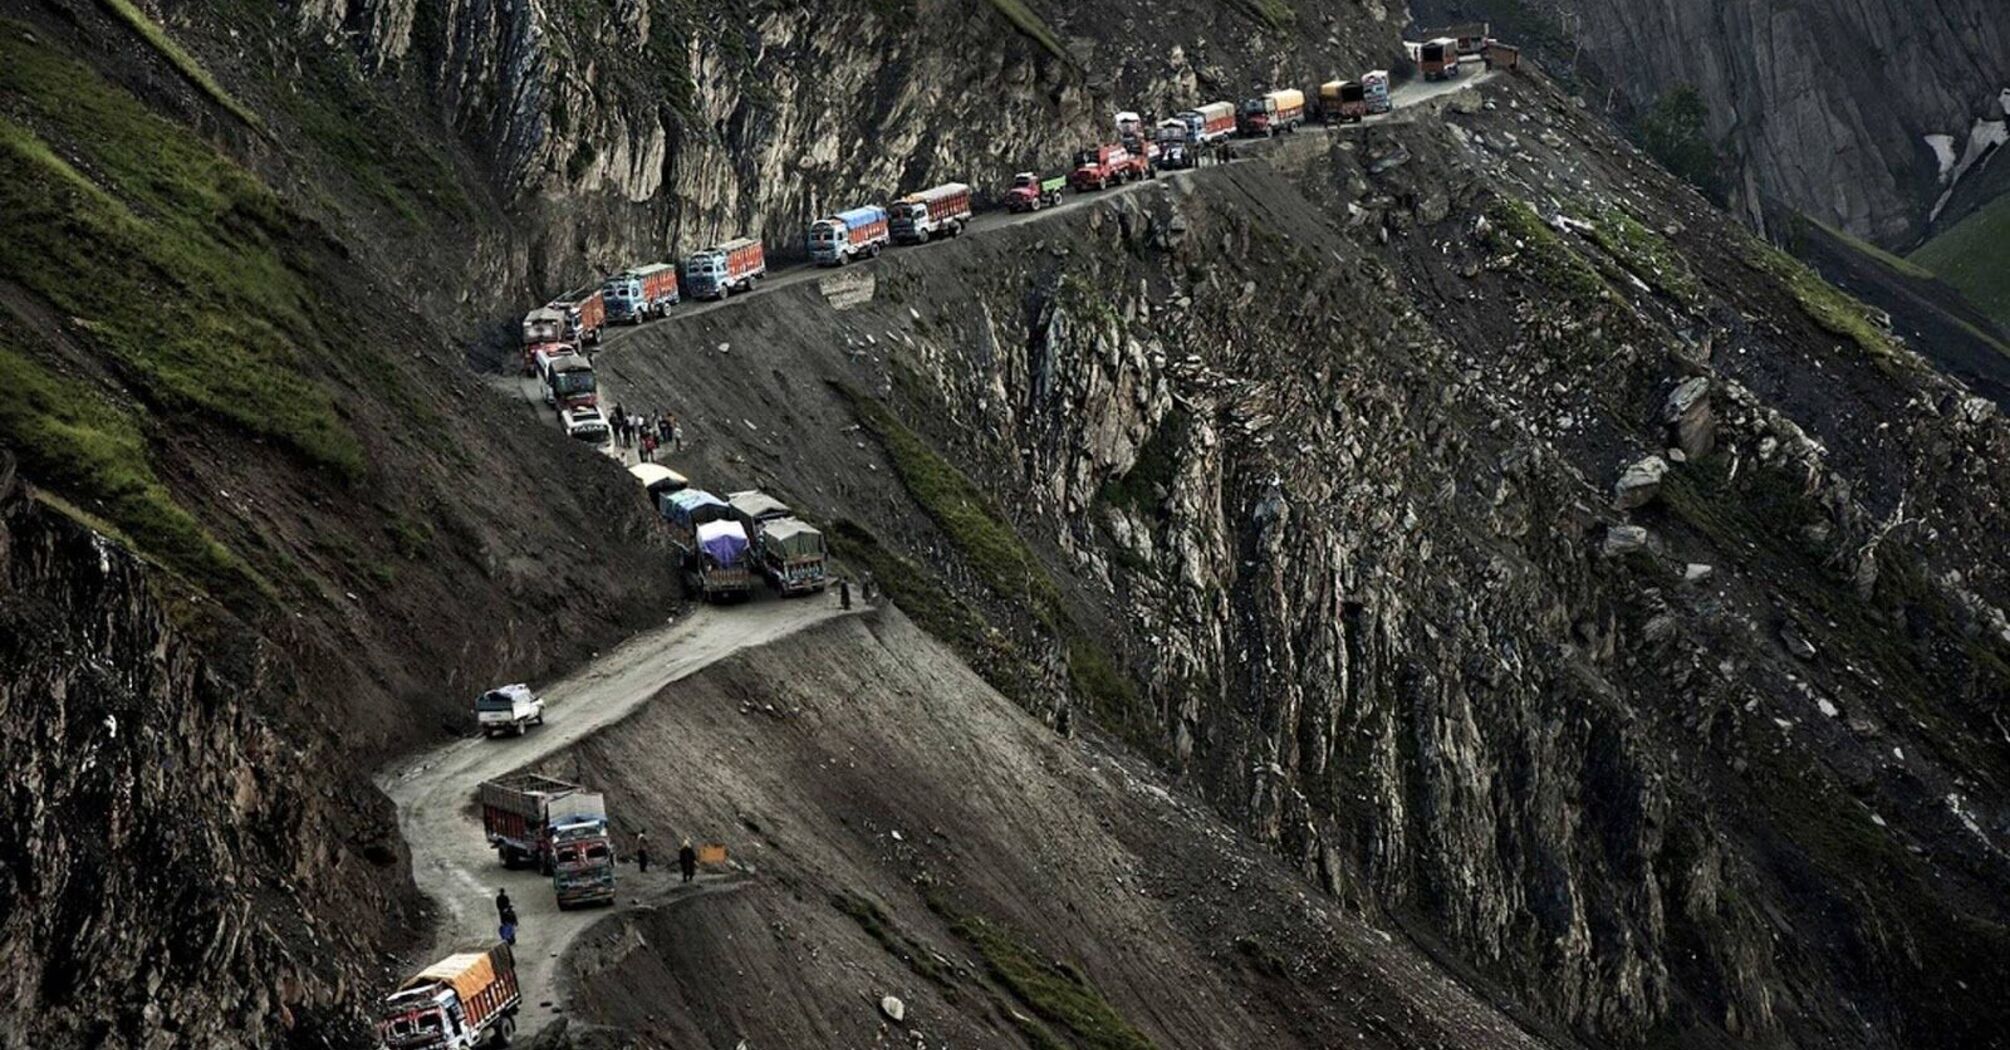 Top 5 most dangerous roads in the world